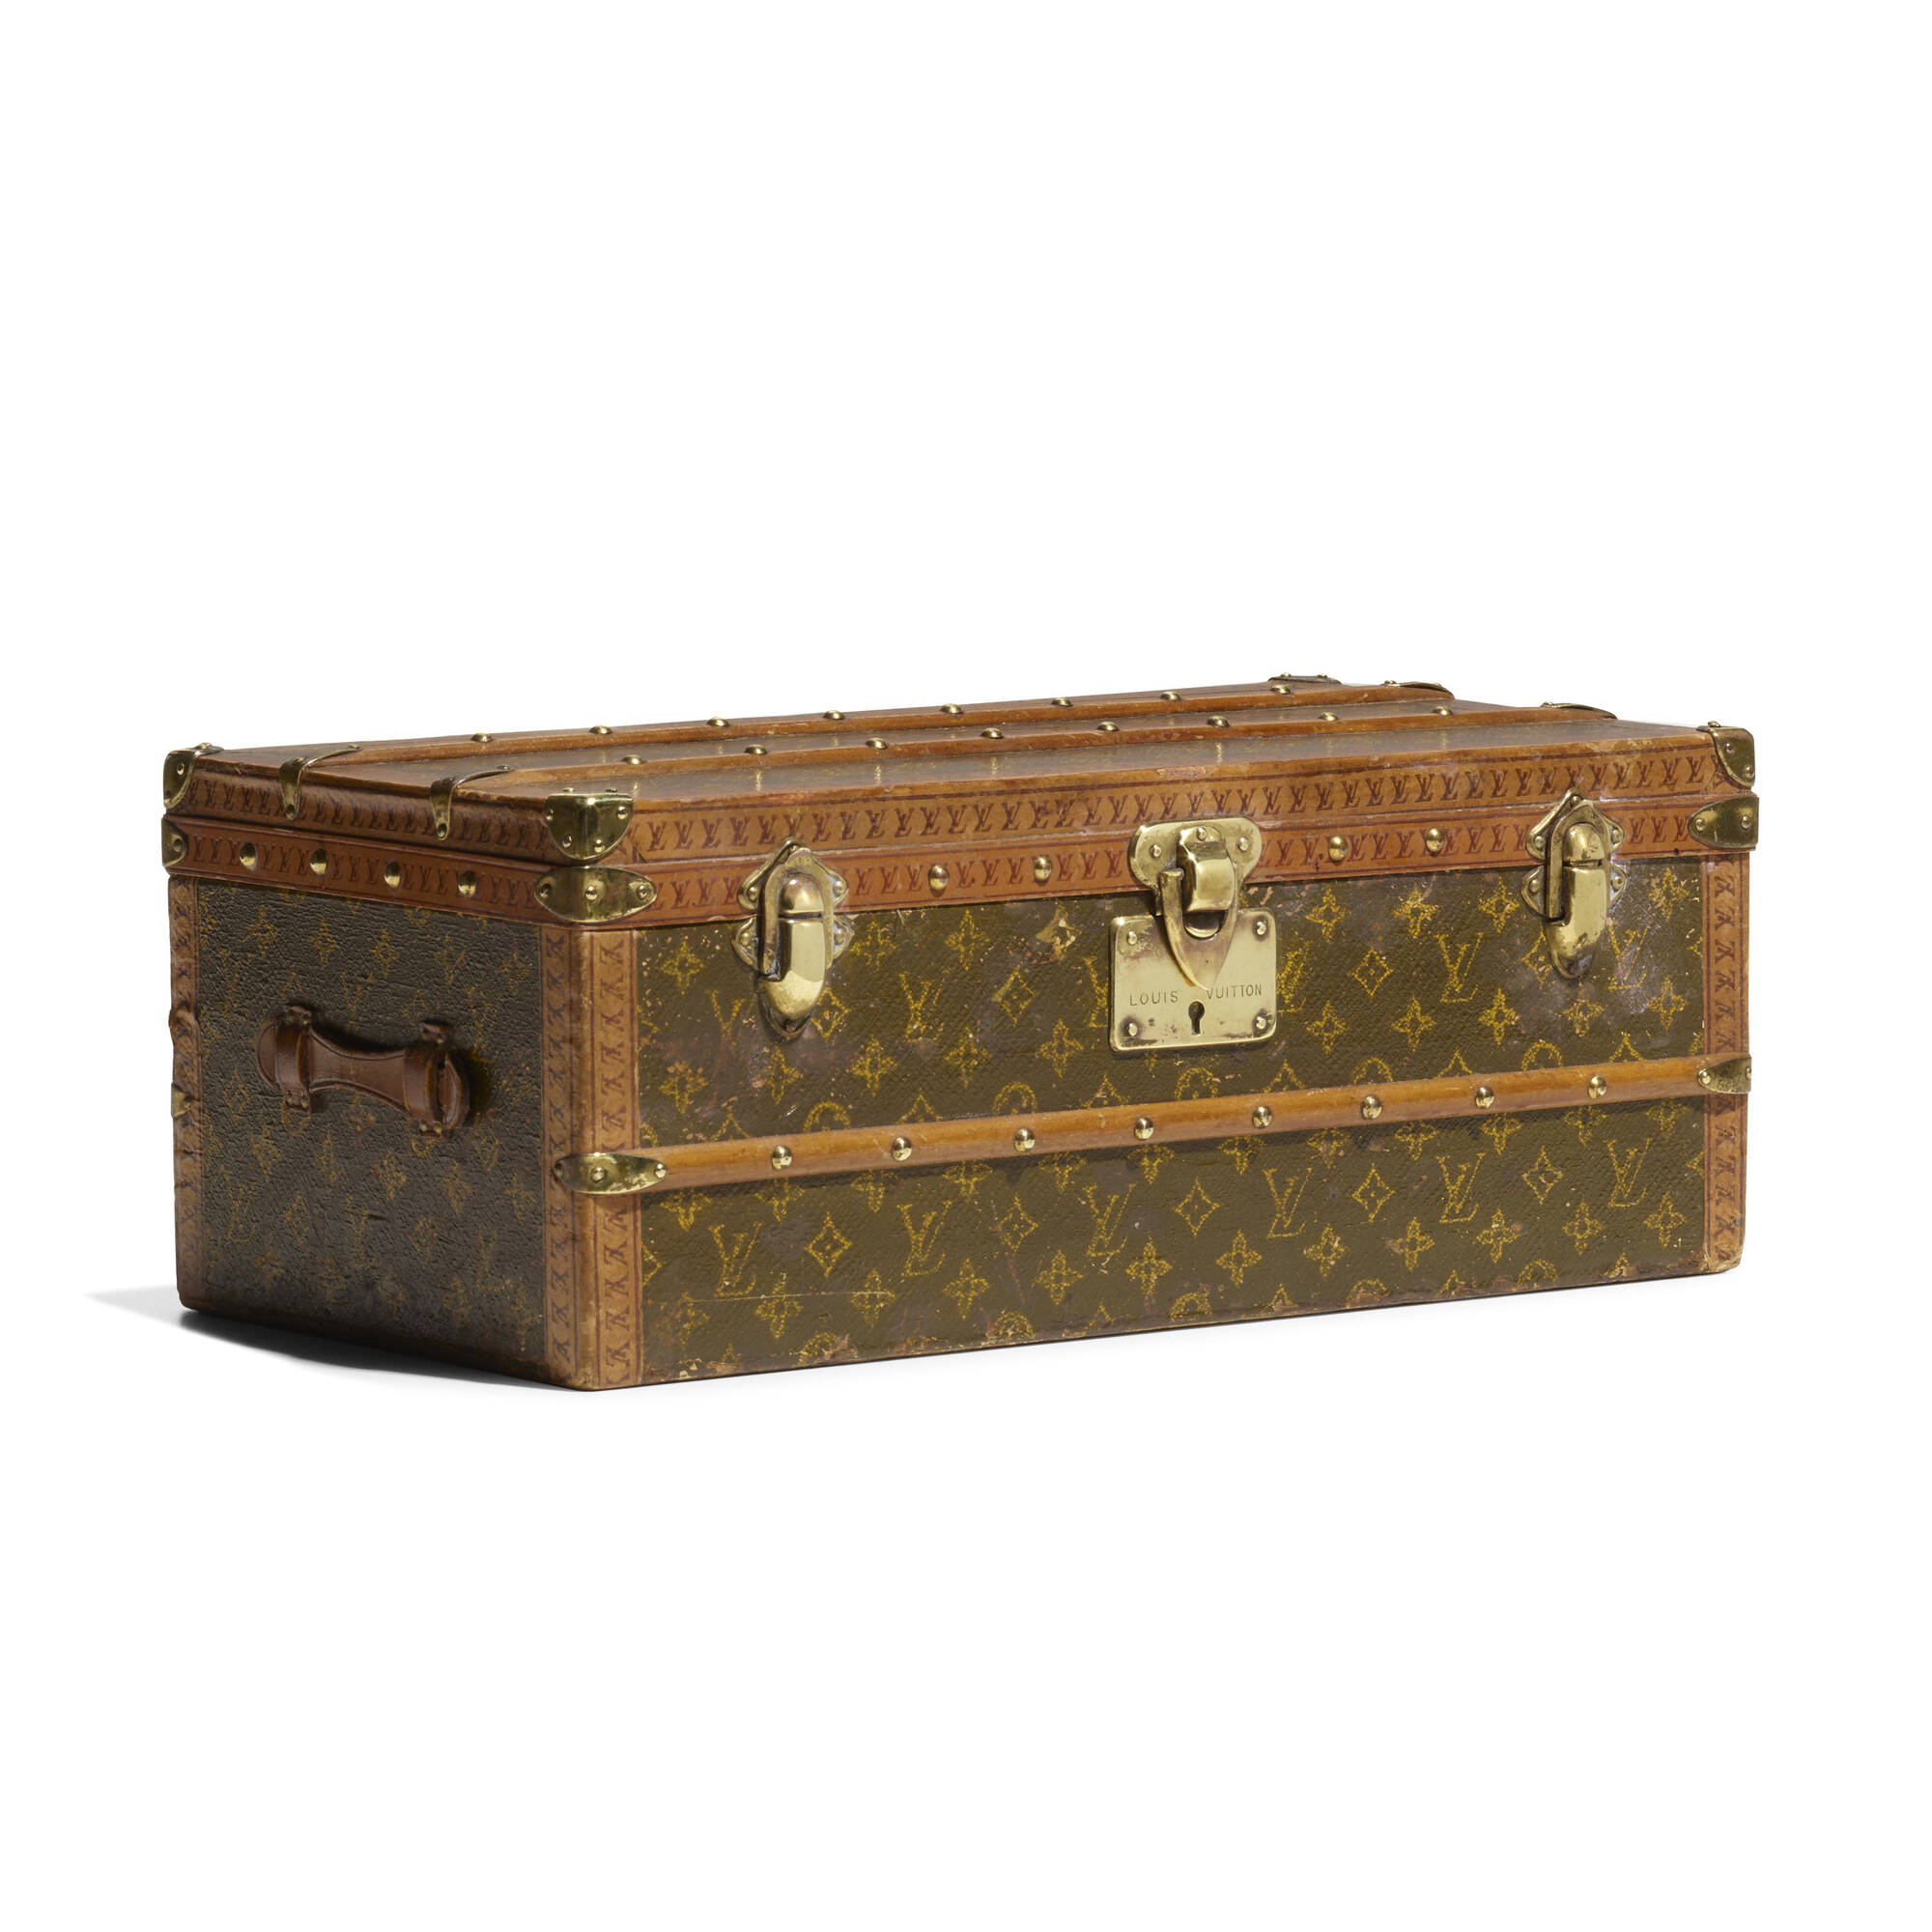 You like more the Louis Vuitton flower trunk or the flower? #Louis Vuitton  trunk #K11 Musea #flower